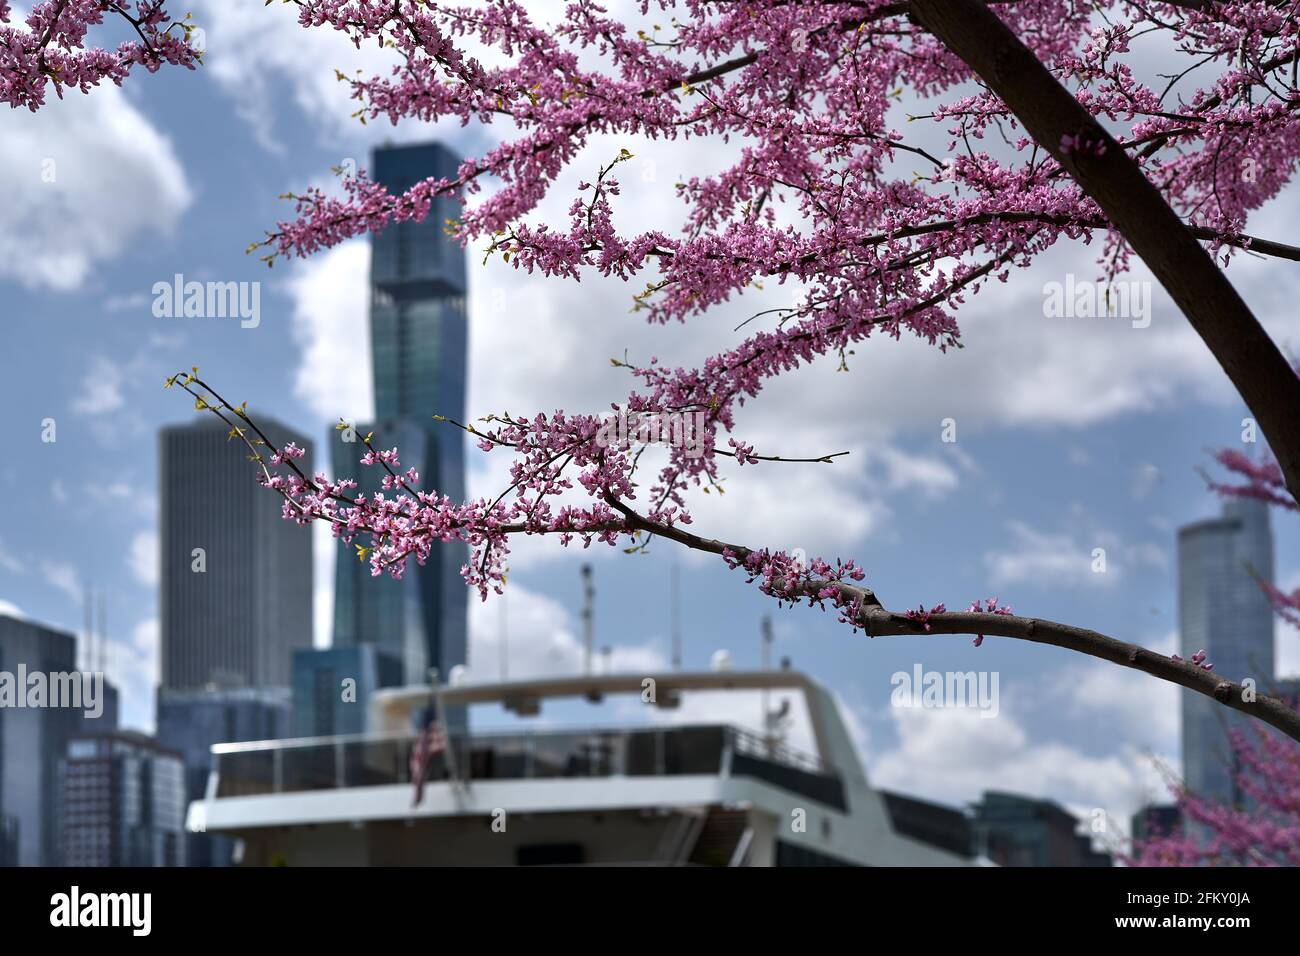 View of Chicago skyline on a sunny day with pink flowering tree in the foreground Stock Photo